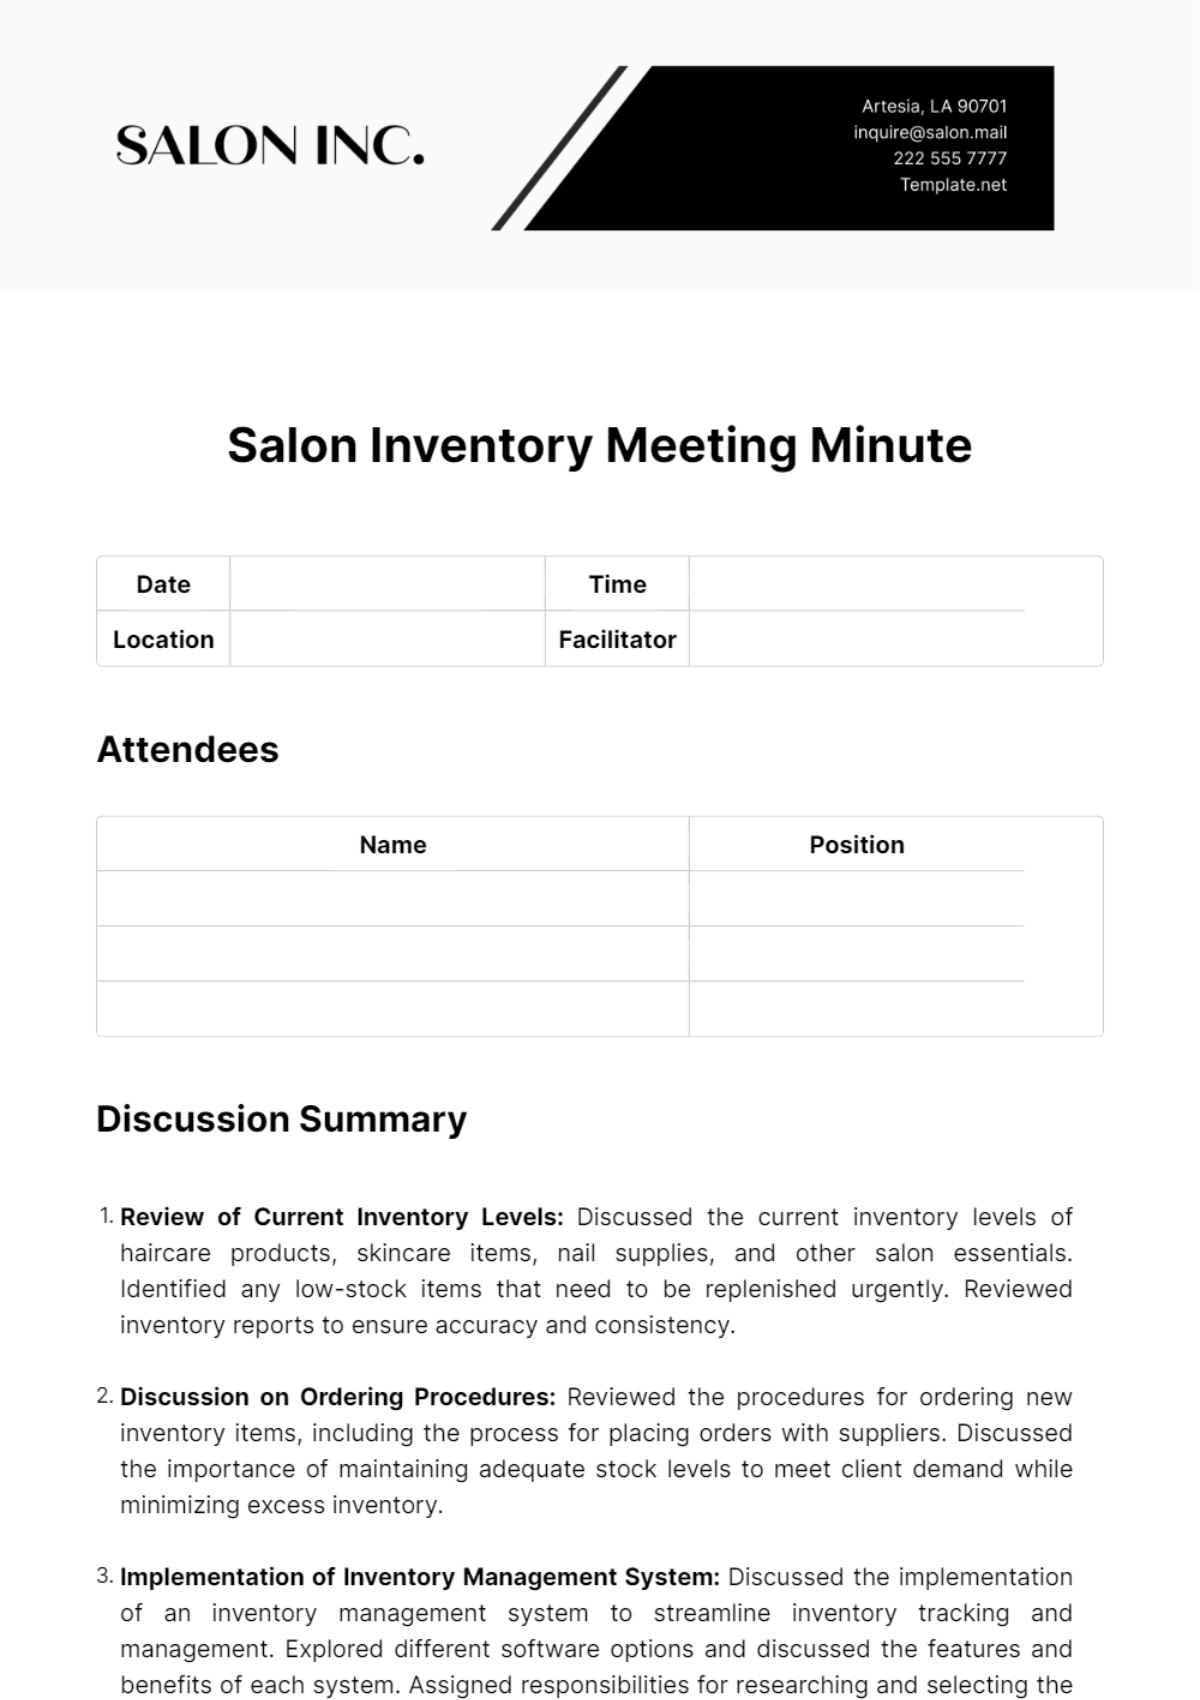 Salon Inventory Meeting Minute Template